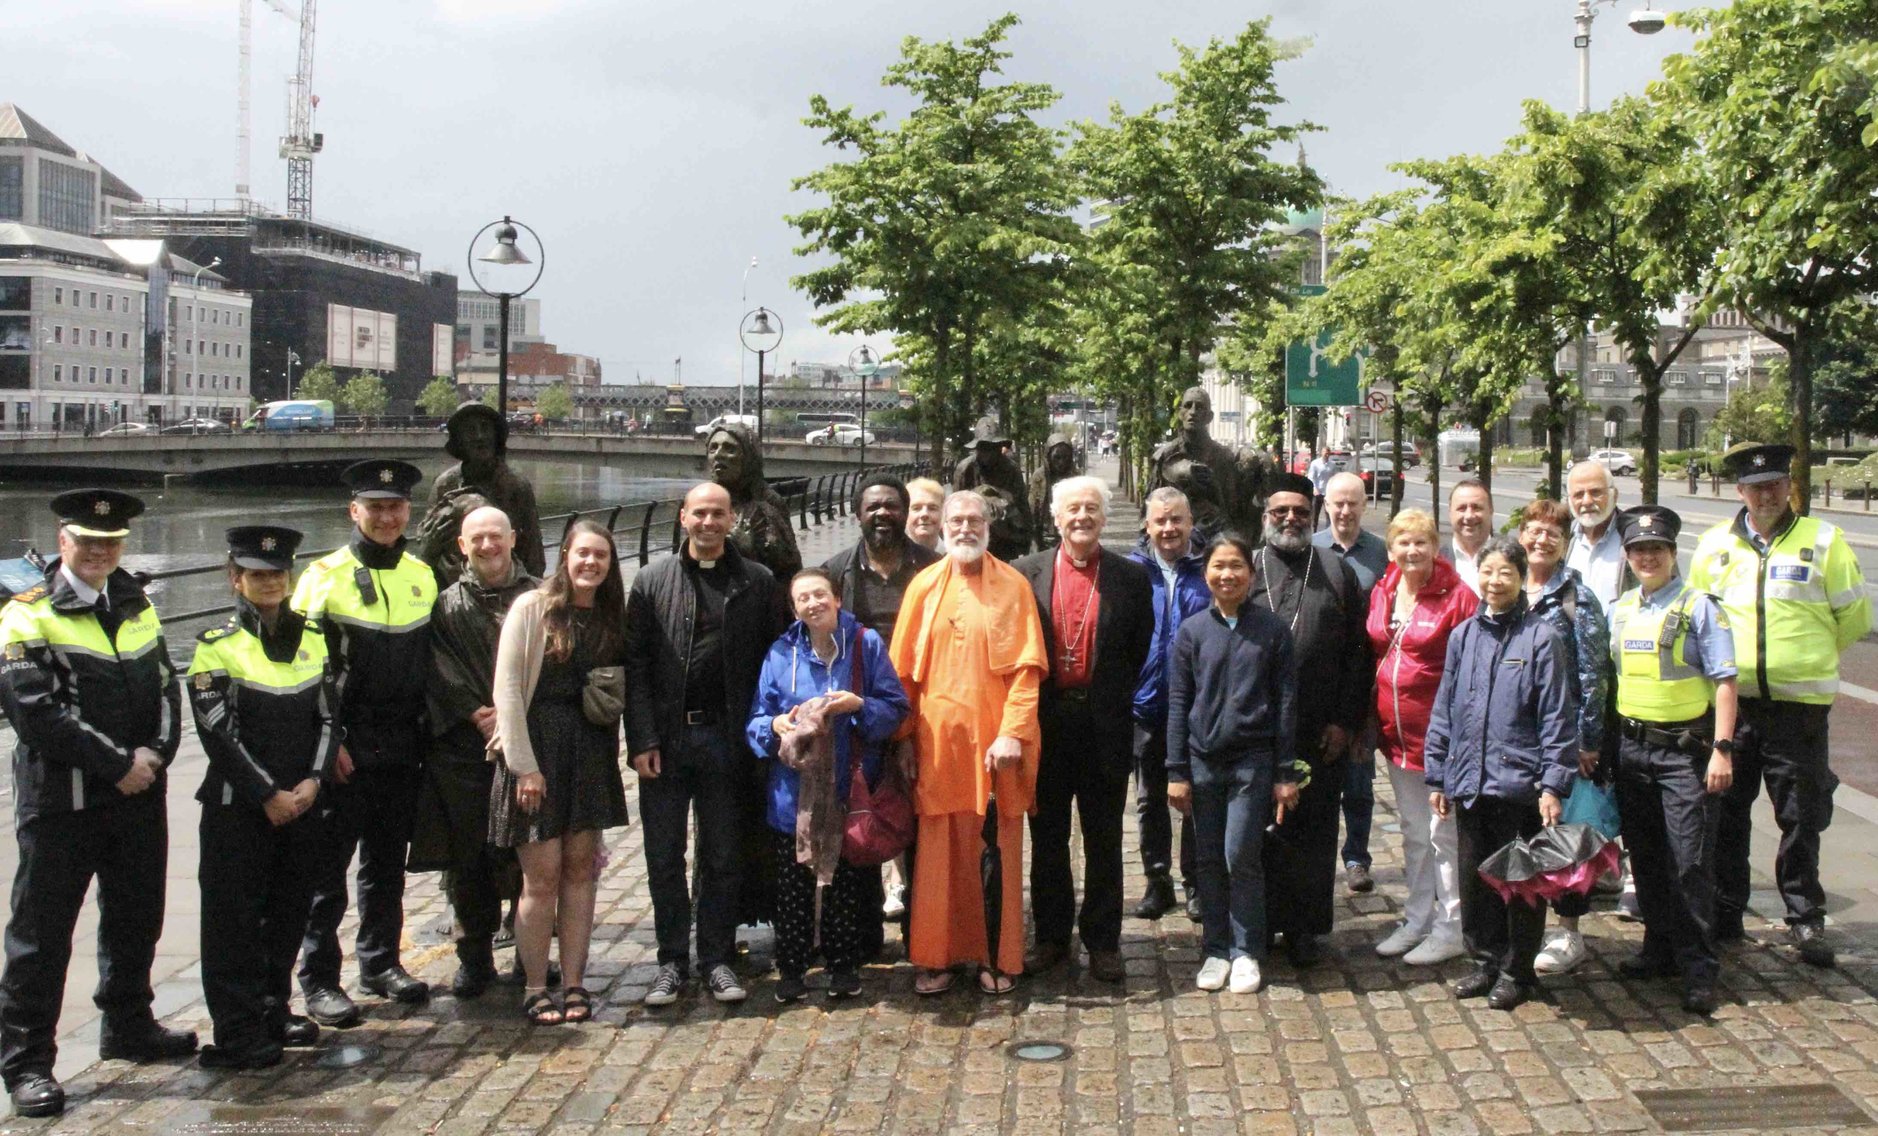 Members of Dublin City Interfaith Forum with some of those who attended the event for World Refugee Day at the Famine Memorial on Custom House Quay, including Assistant Commissioner Paul Cleary and members of An Garda Siochana.